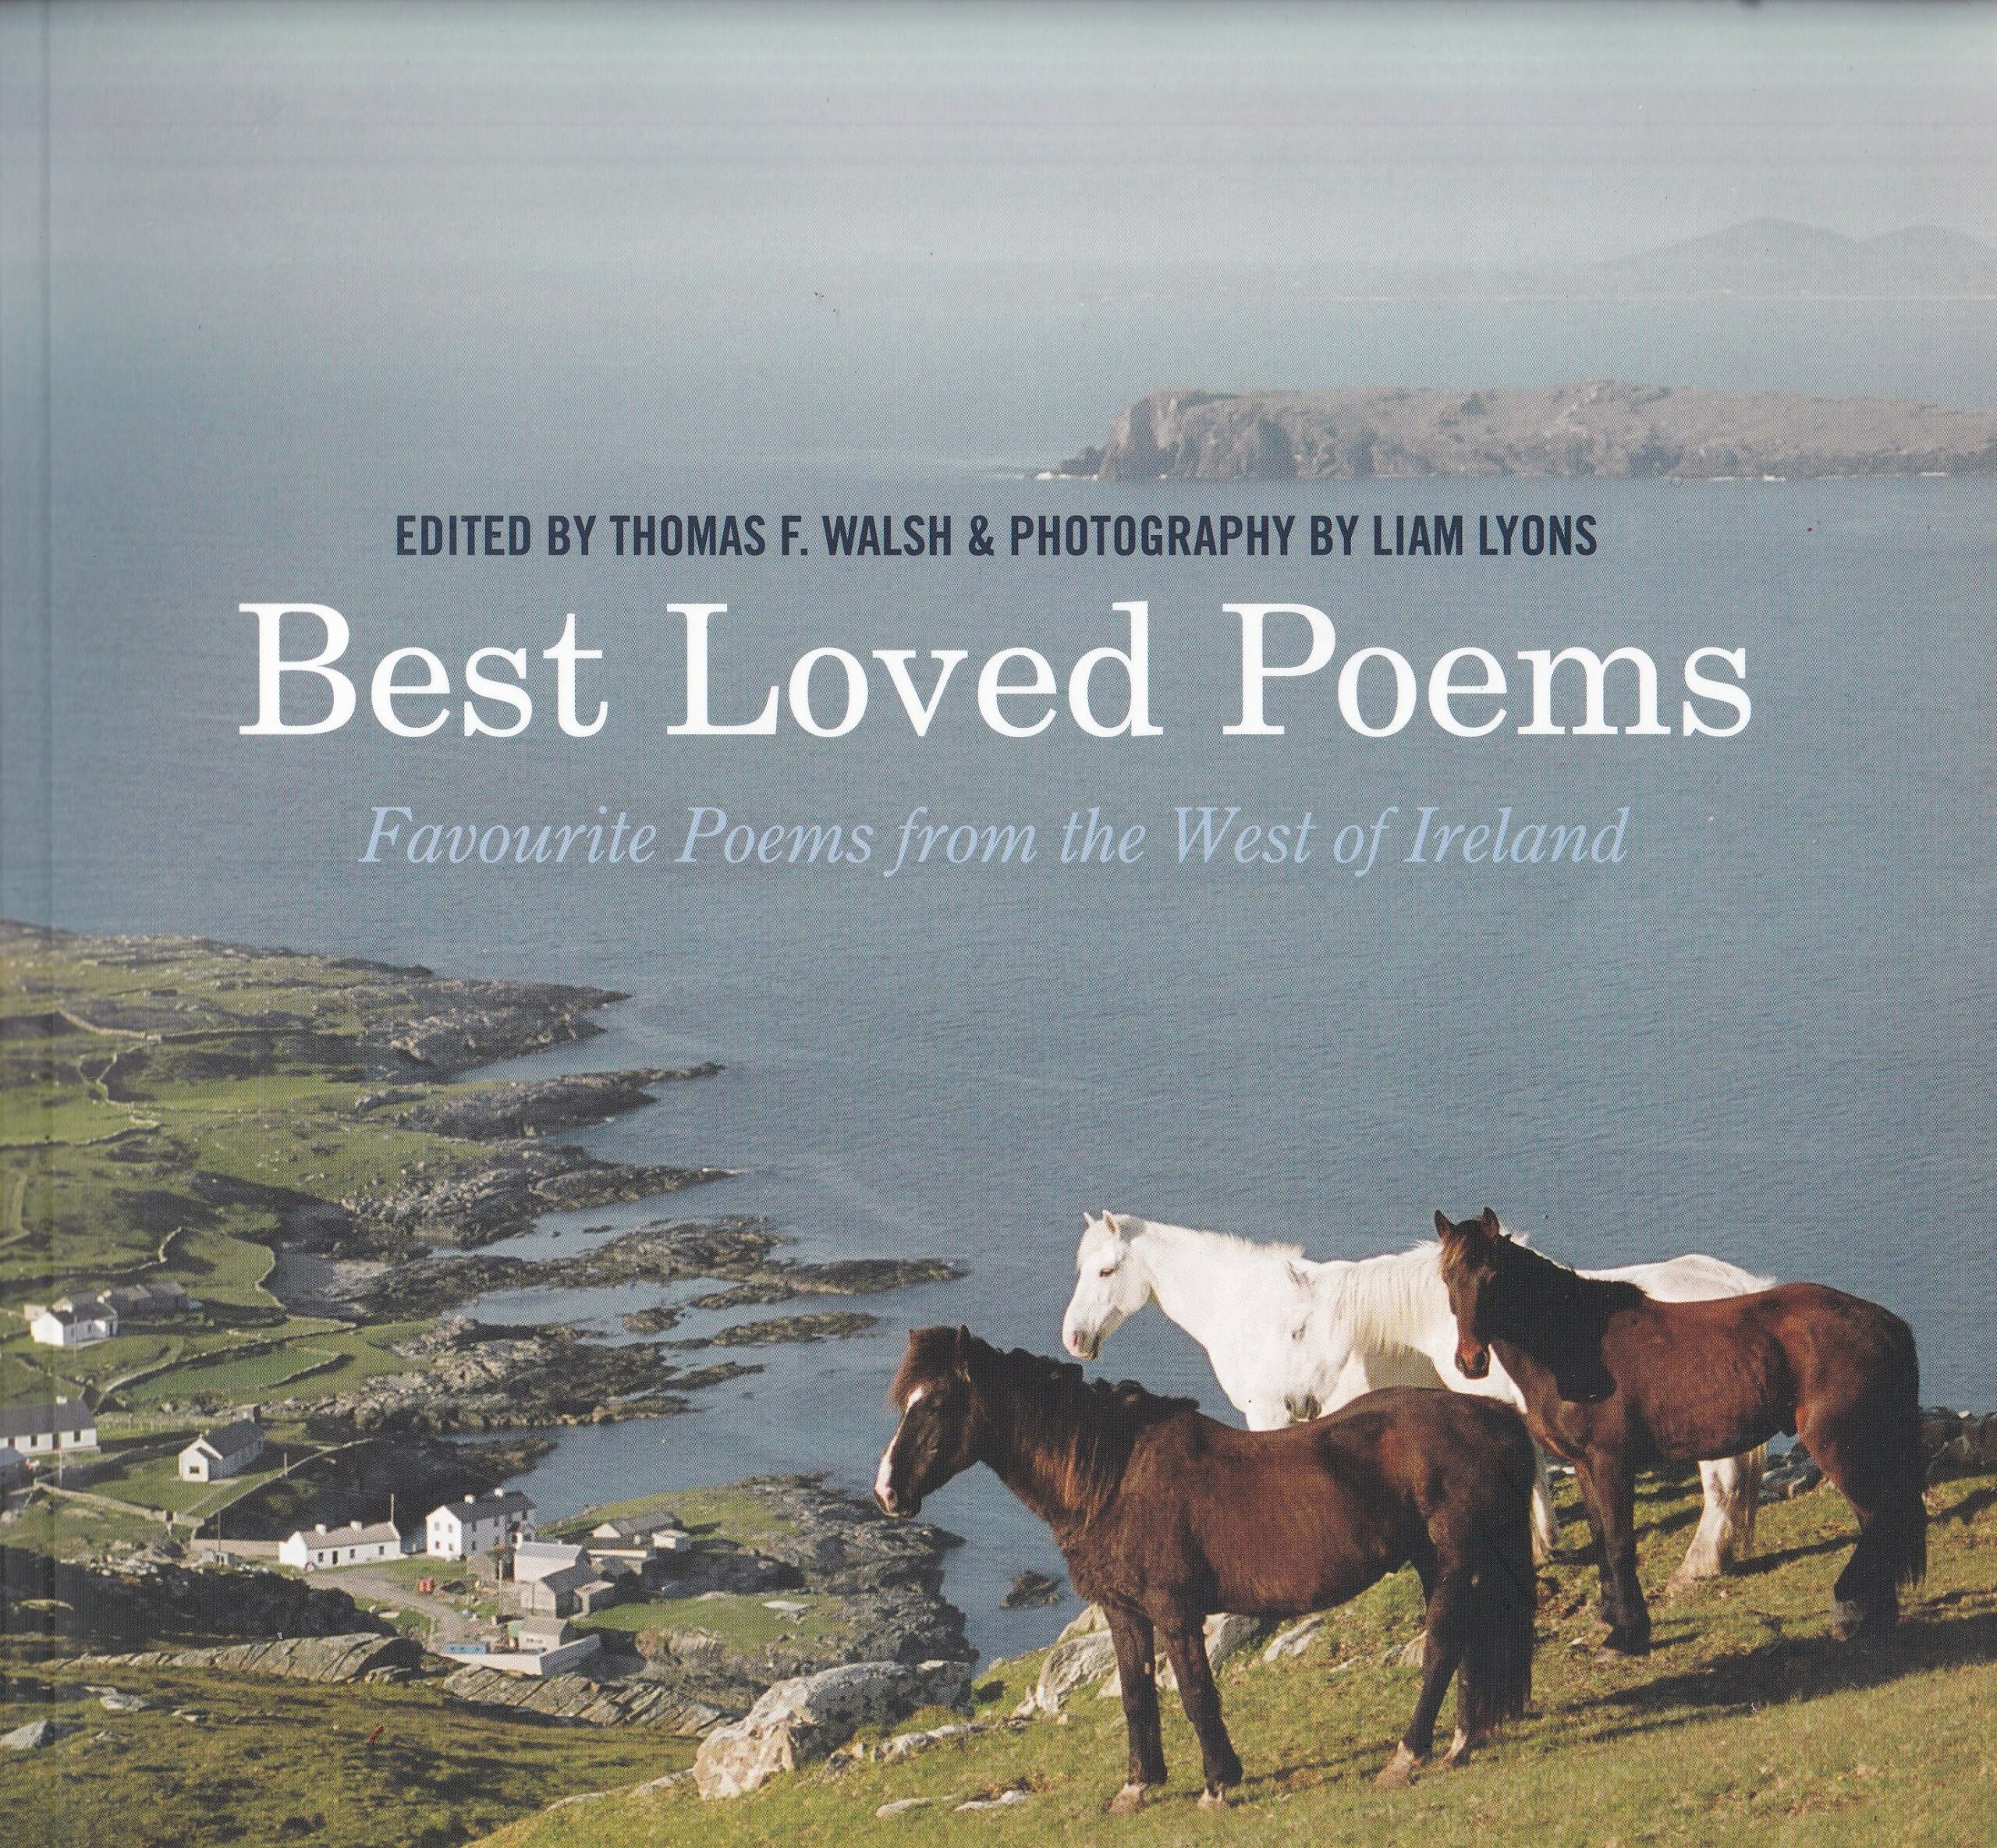 Best Loved Poems: Favourite Poems from the West of Ireland | Thomas F. Walsh (ed.) | Charlie Byrne's